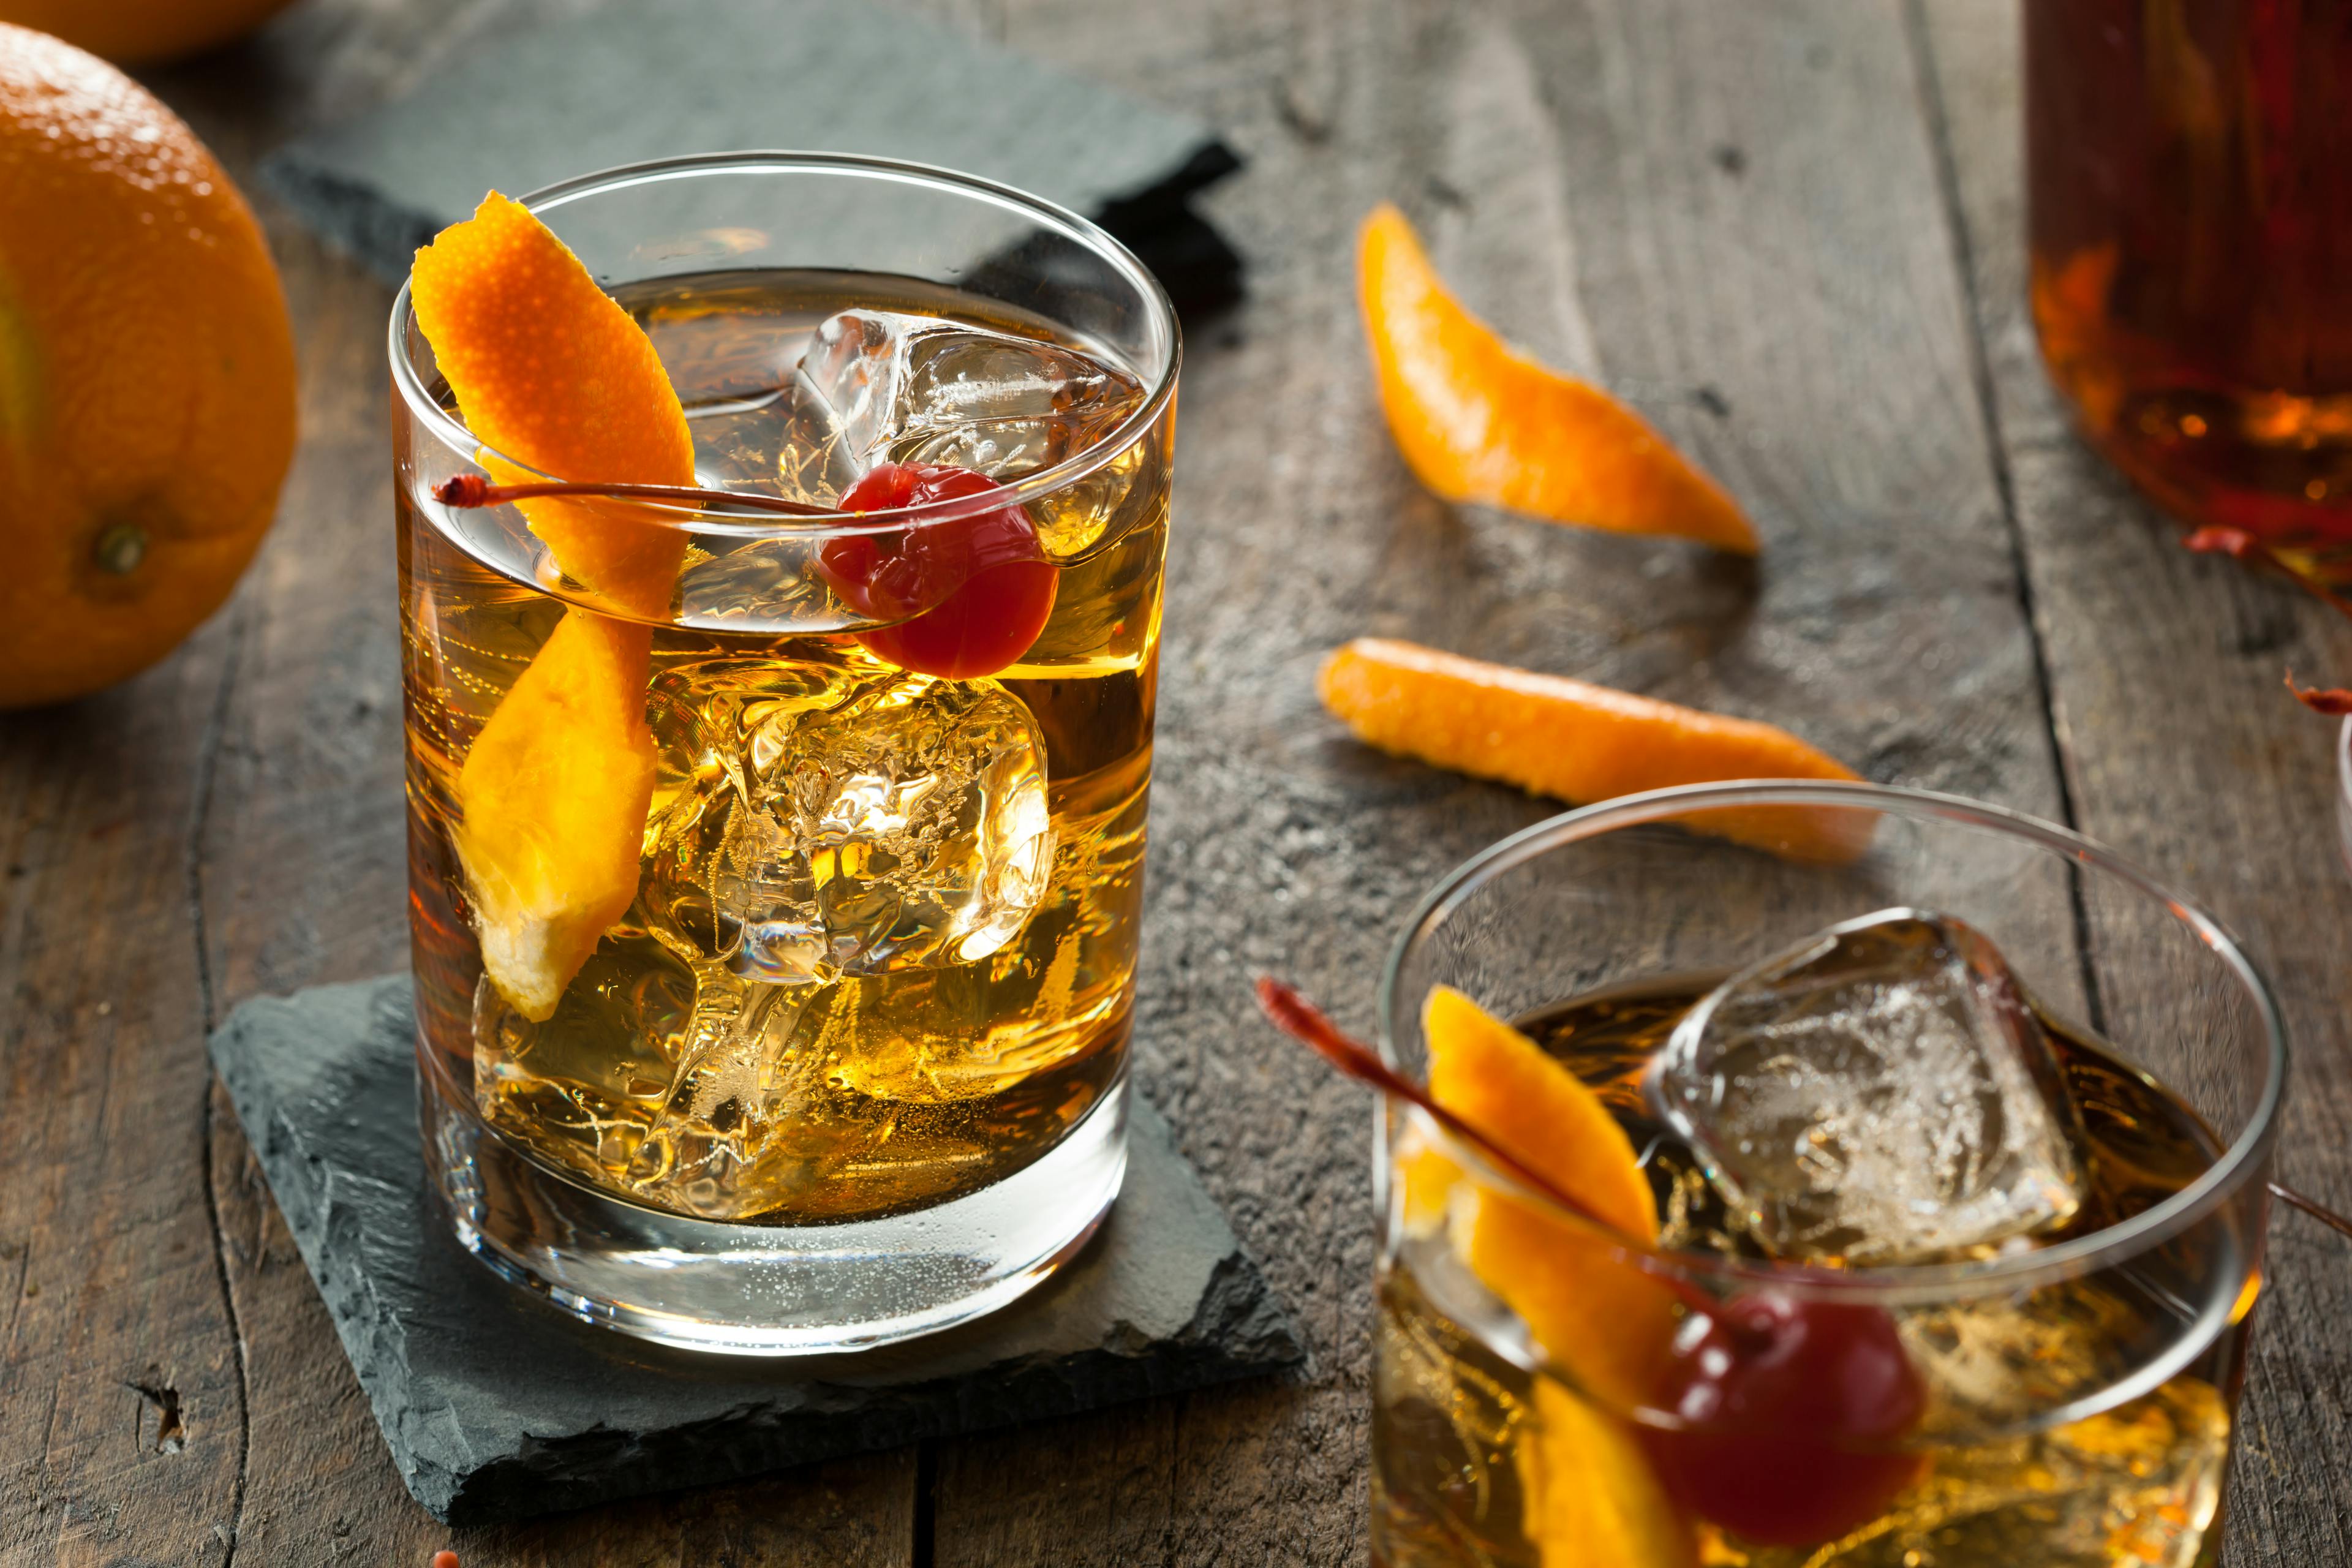 This image shows an old fashioned cocktail with a twist of orange and a cherry sitting in a short heavy based glass cocktail glass that sits on a black slate coaster all sitting on a wooden table